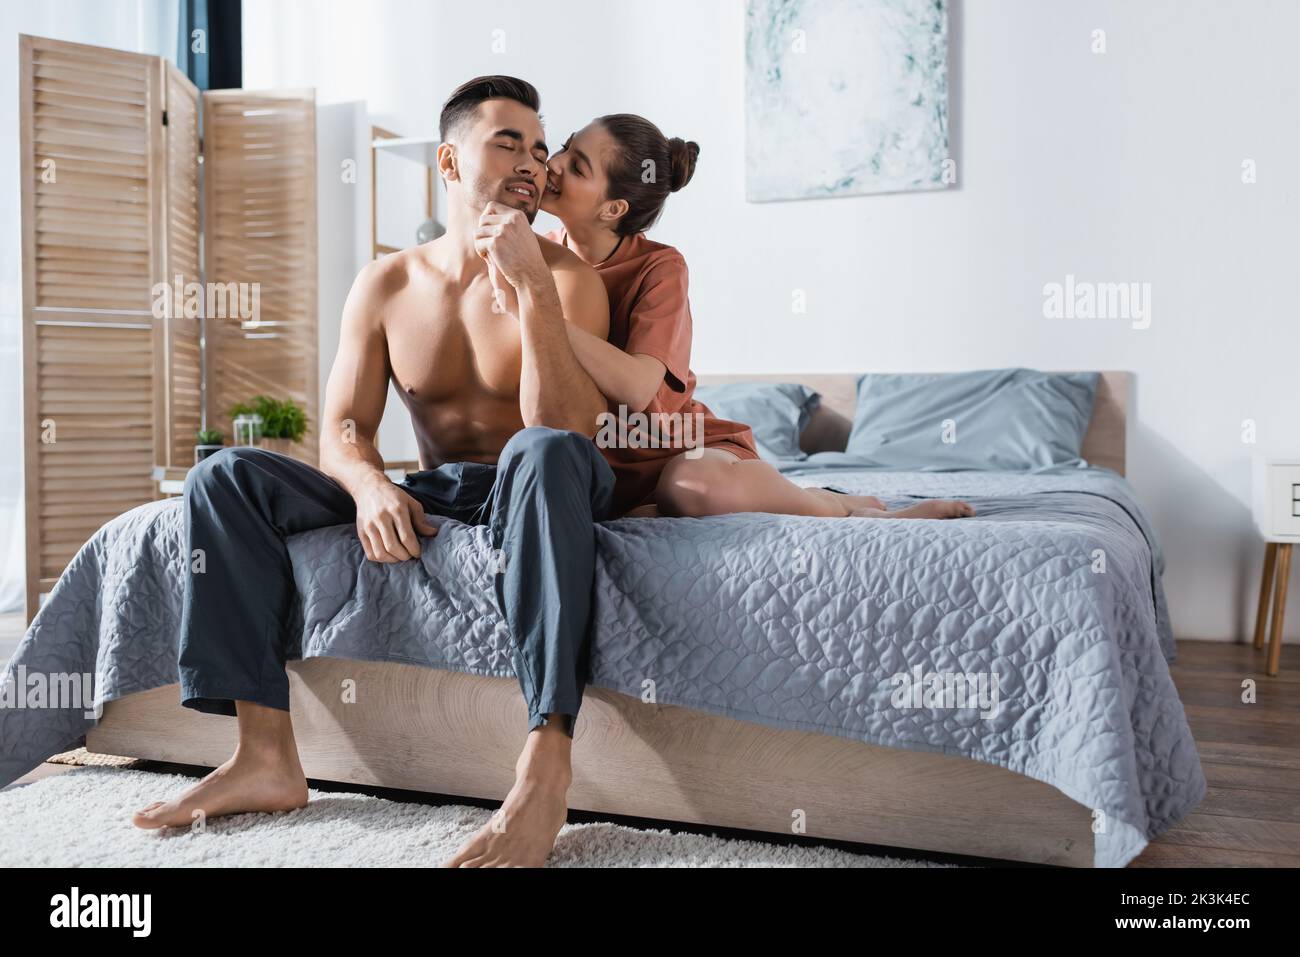 sexy woman in t-shirt kissing shirtless man sitting on bed in pajama pants Stock Photo